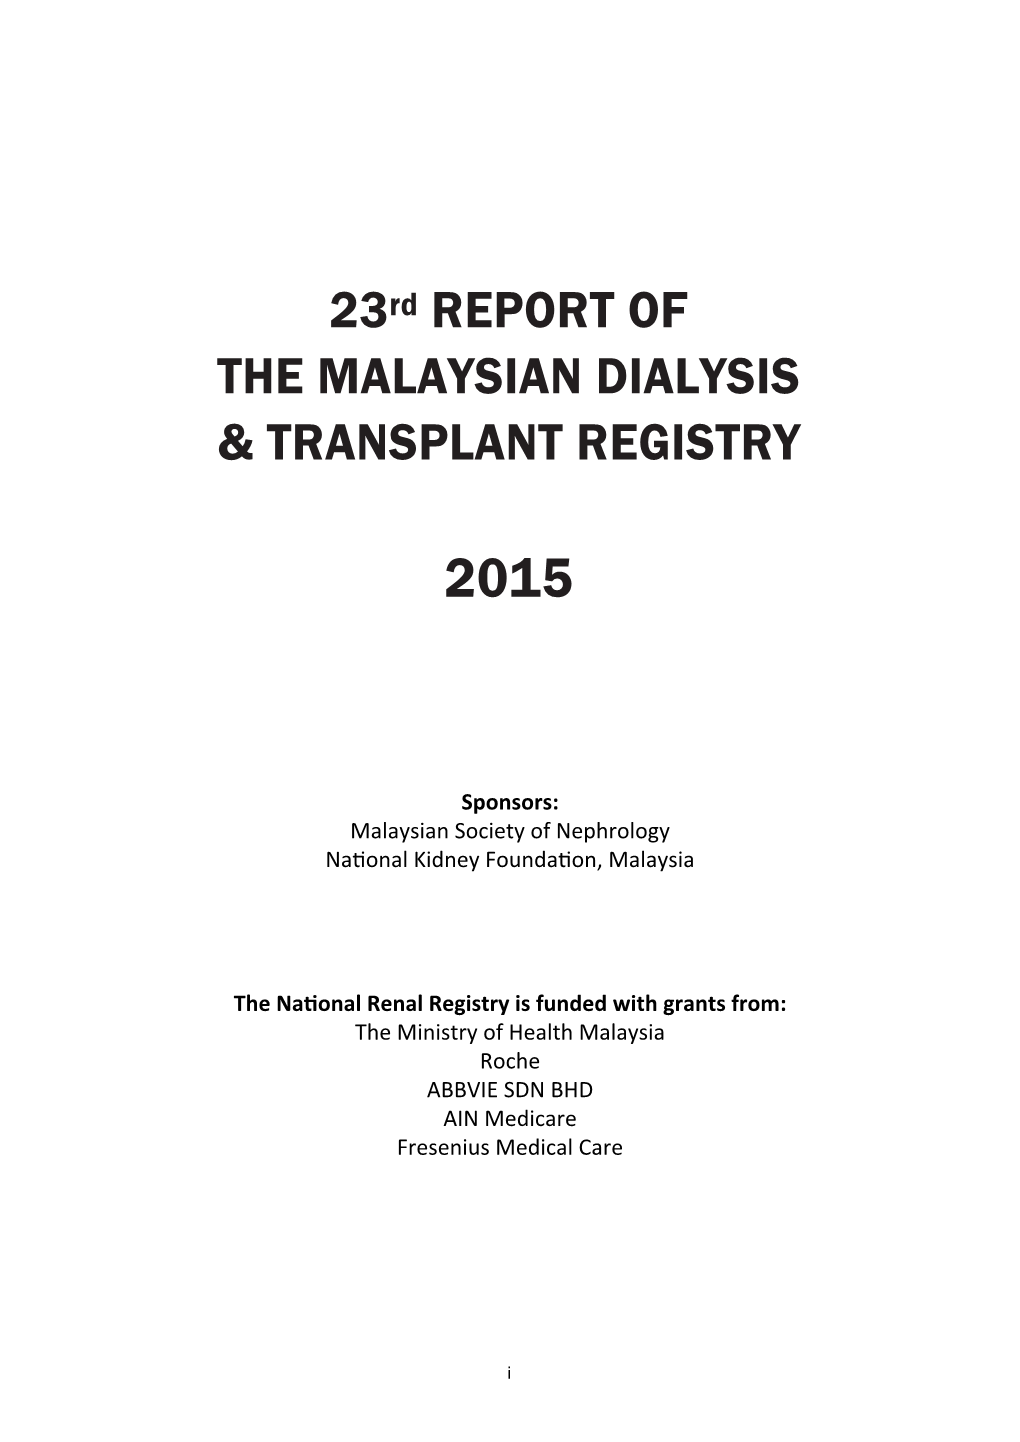 23Rd REPORT of the MALAYSIAN DIALYSIS & TRANSPLANT REGISTRY